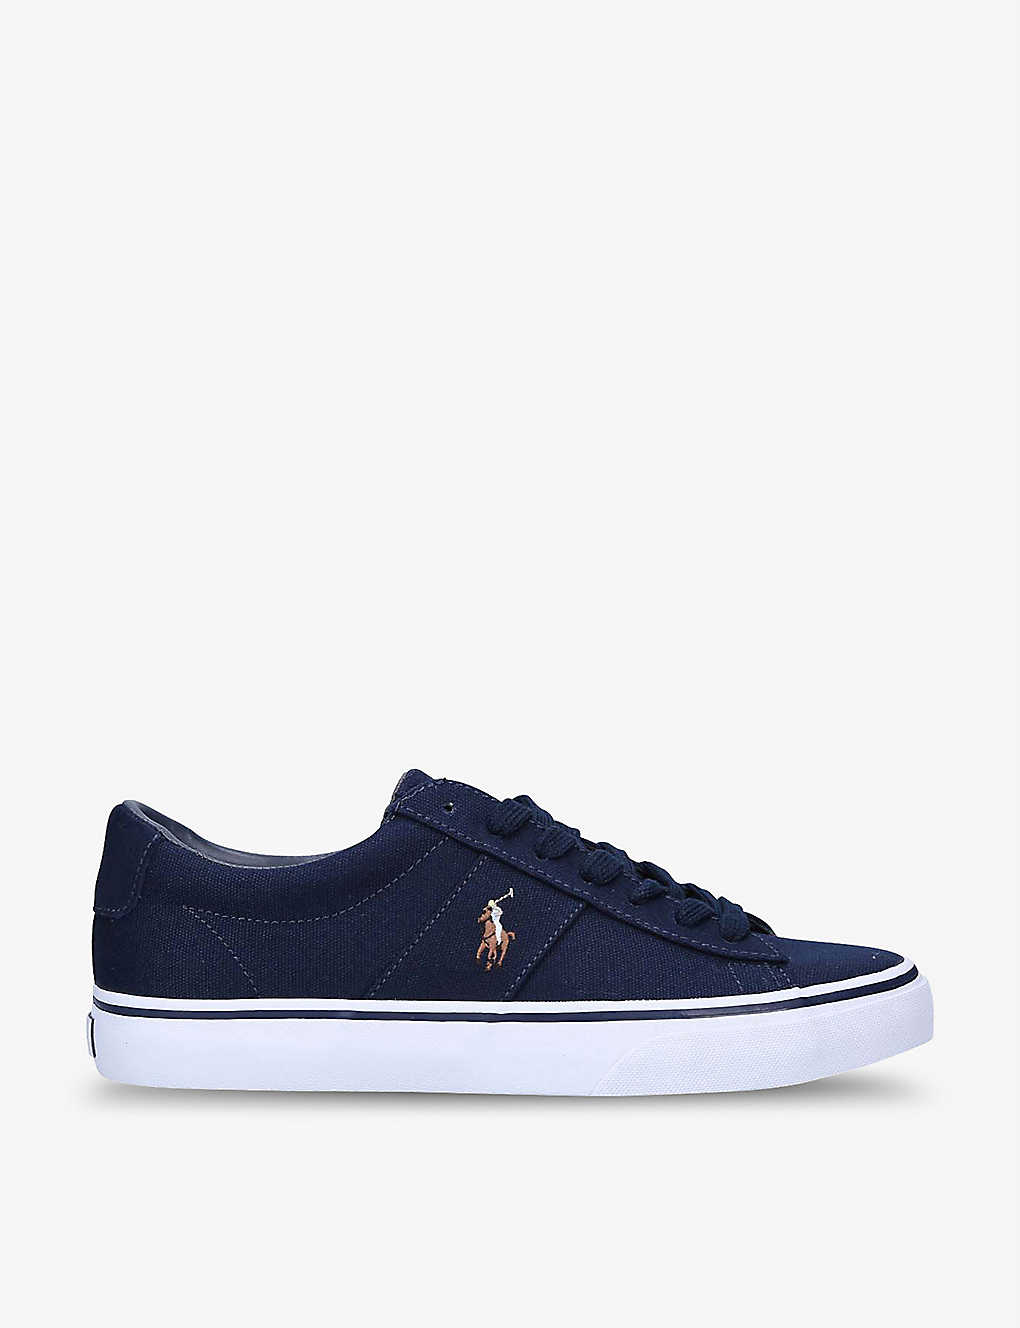 POLO RALPH LAUREN POLO RALPH LAUREN MEN'S NAVY SAYER LOGO-EMBROIDERED COTTON AND SUEDE LOW-TOP TRAINERS,56836838